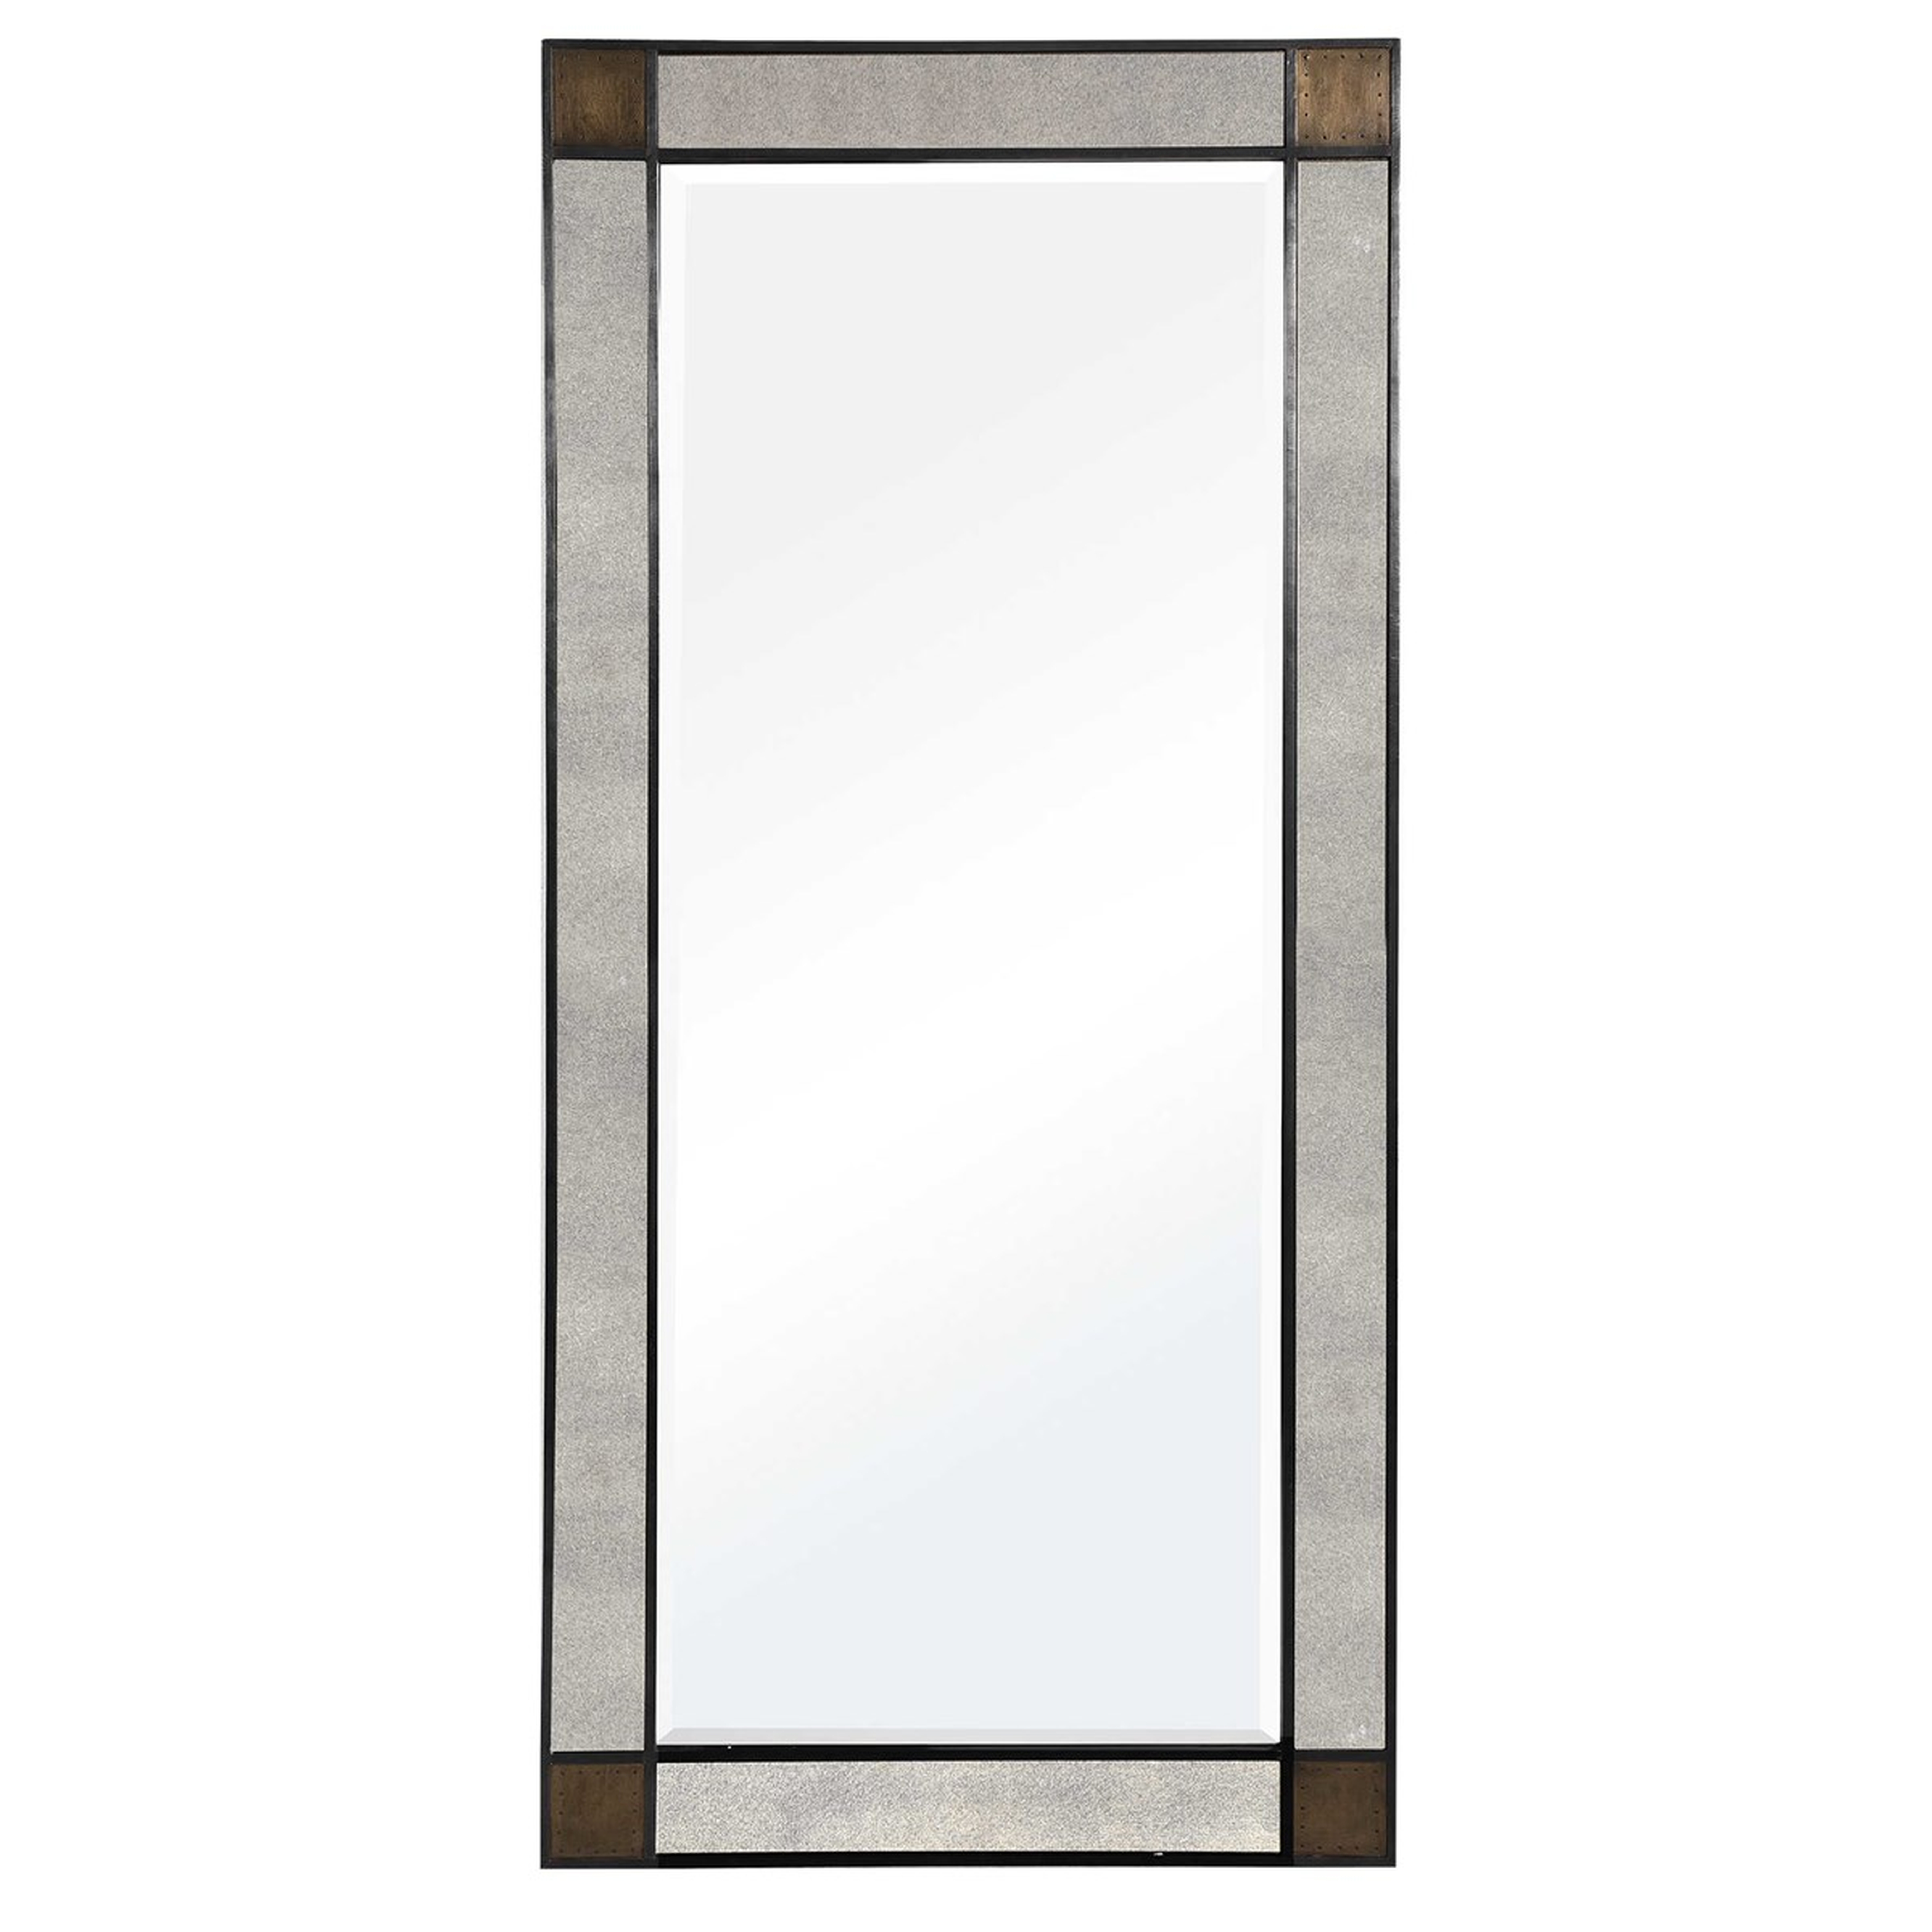 NO LONGER AVAIL Newcomb Leaner Mirror - Hudsonhill Foundry